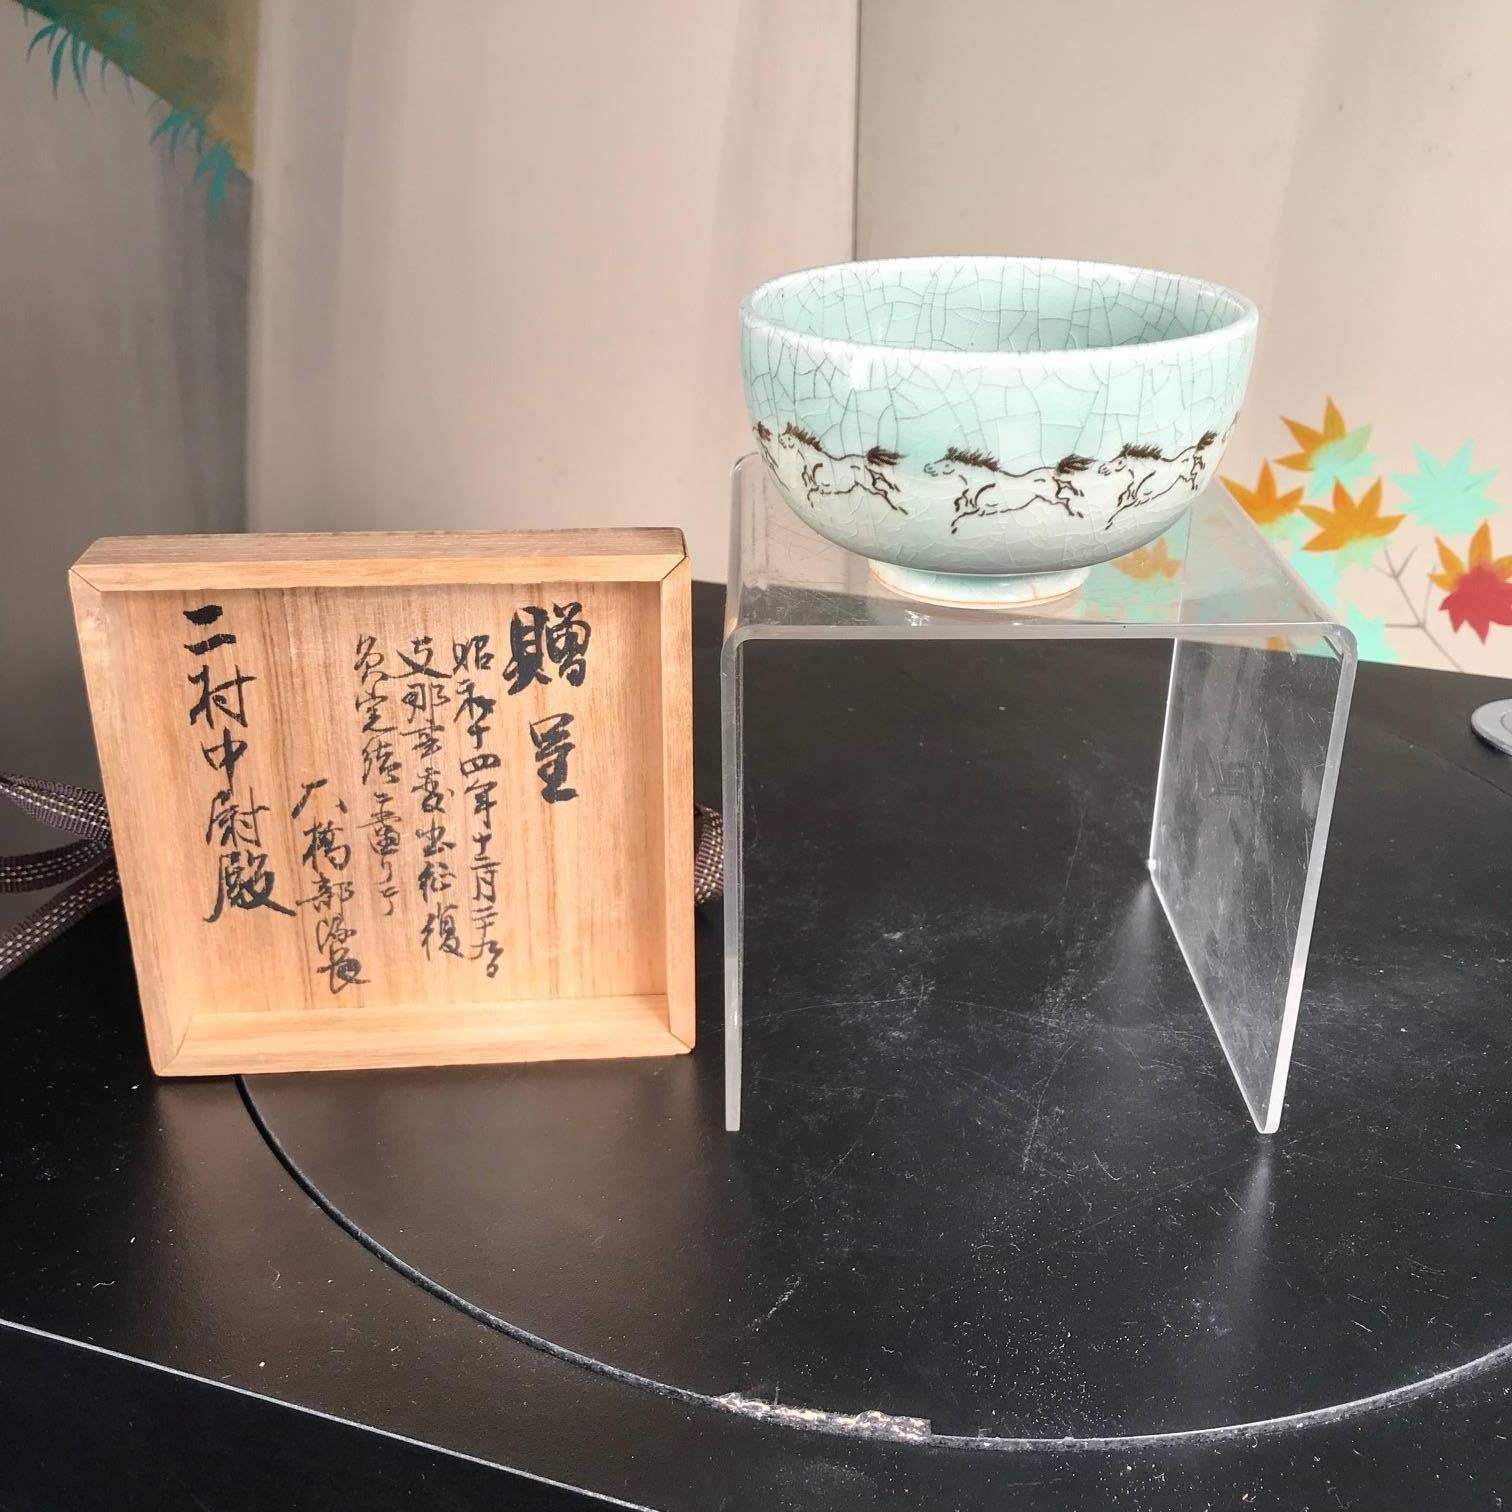 Mint and artisan signed and boxed, Meiko Nagahashi.

From Japan, a beautiful hand-built, painted and glazed, Soma ware tea bowl with a galloping horses motif by Japan's noteworthy artisan, Meiko Nagahashi created in circa 1939.

A stunning light